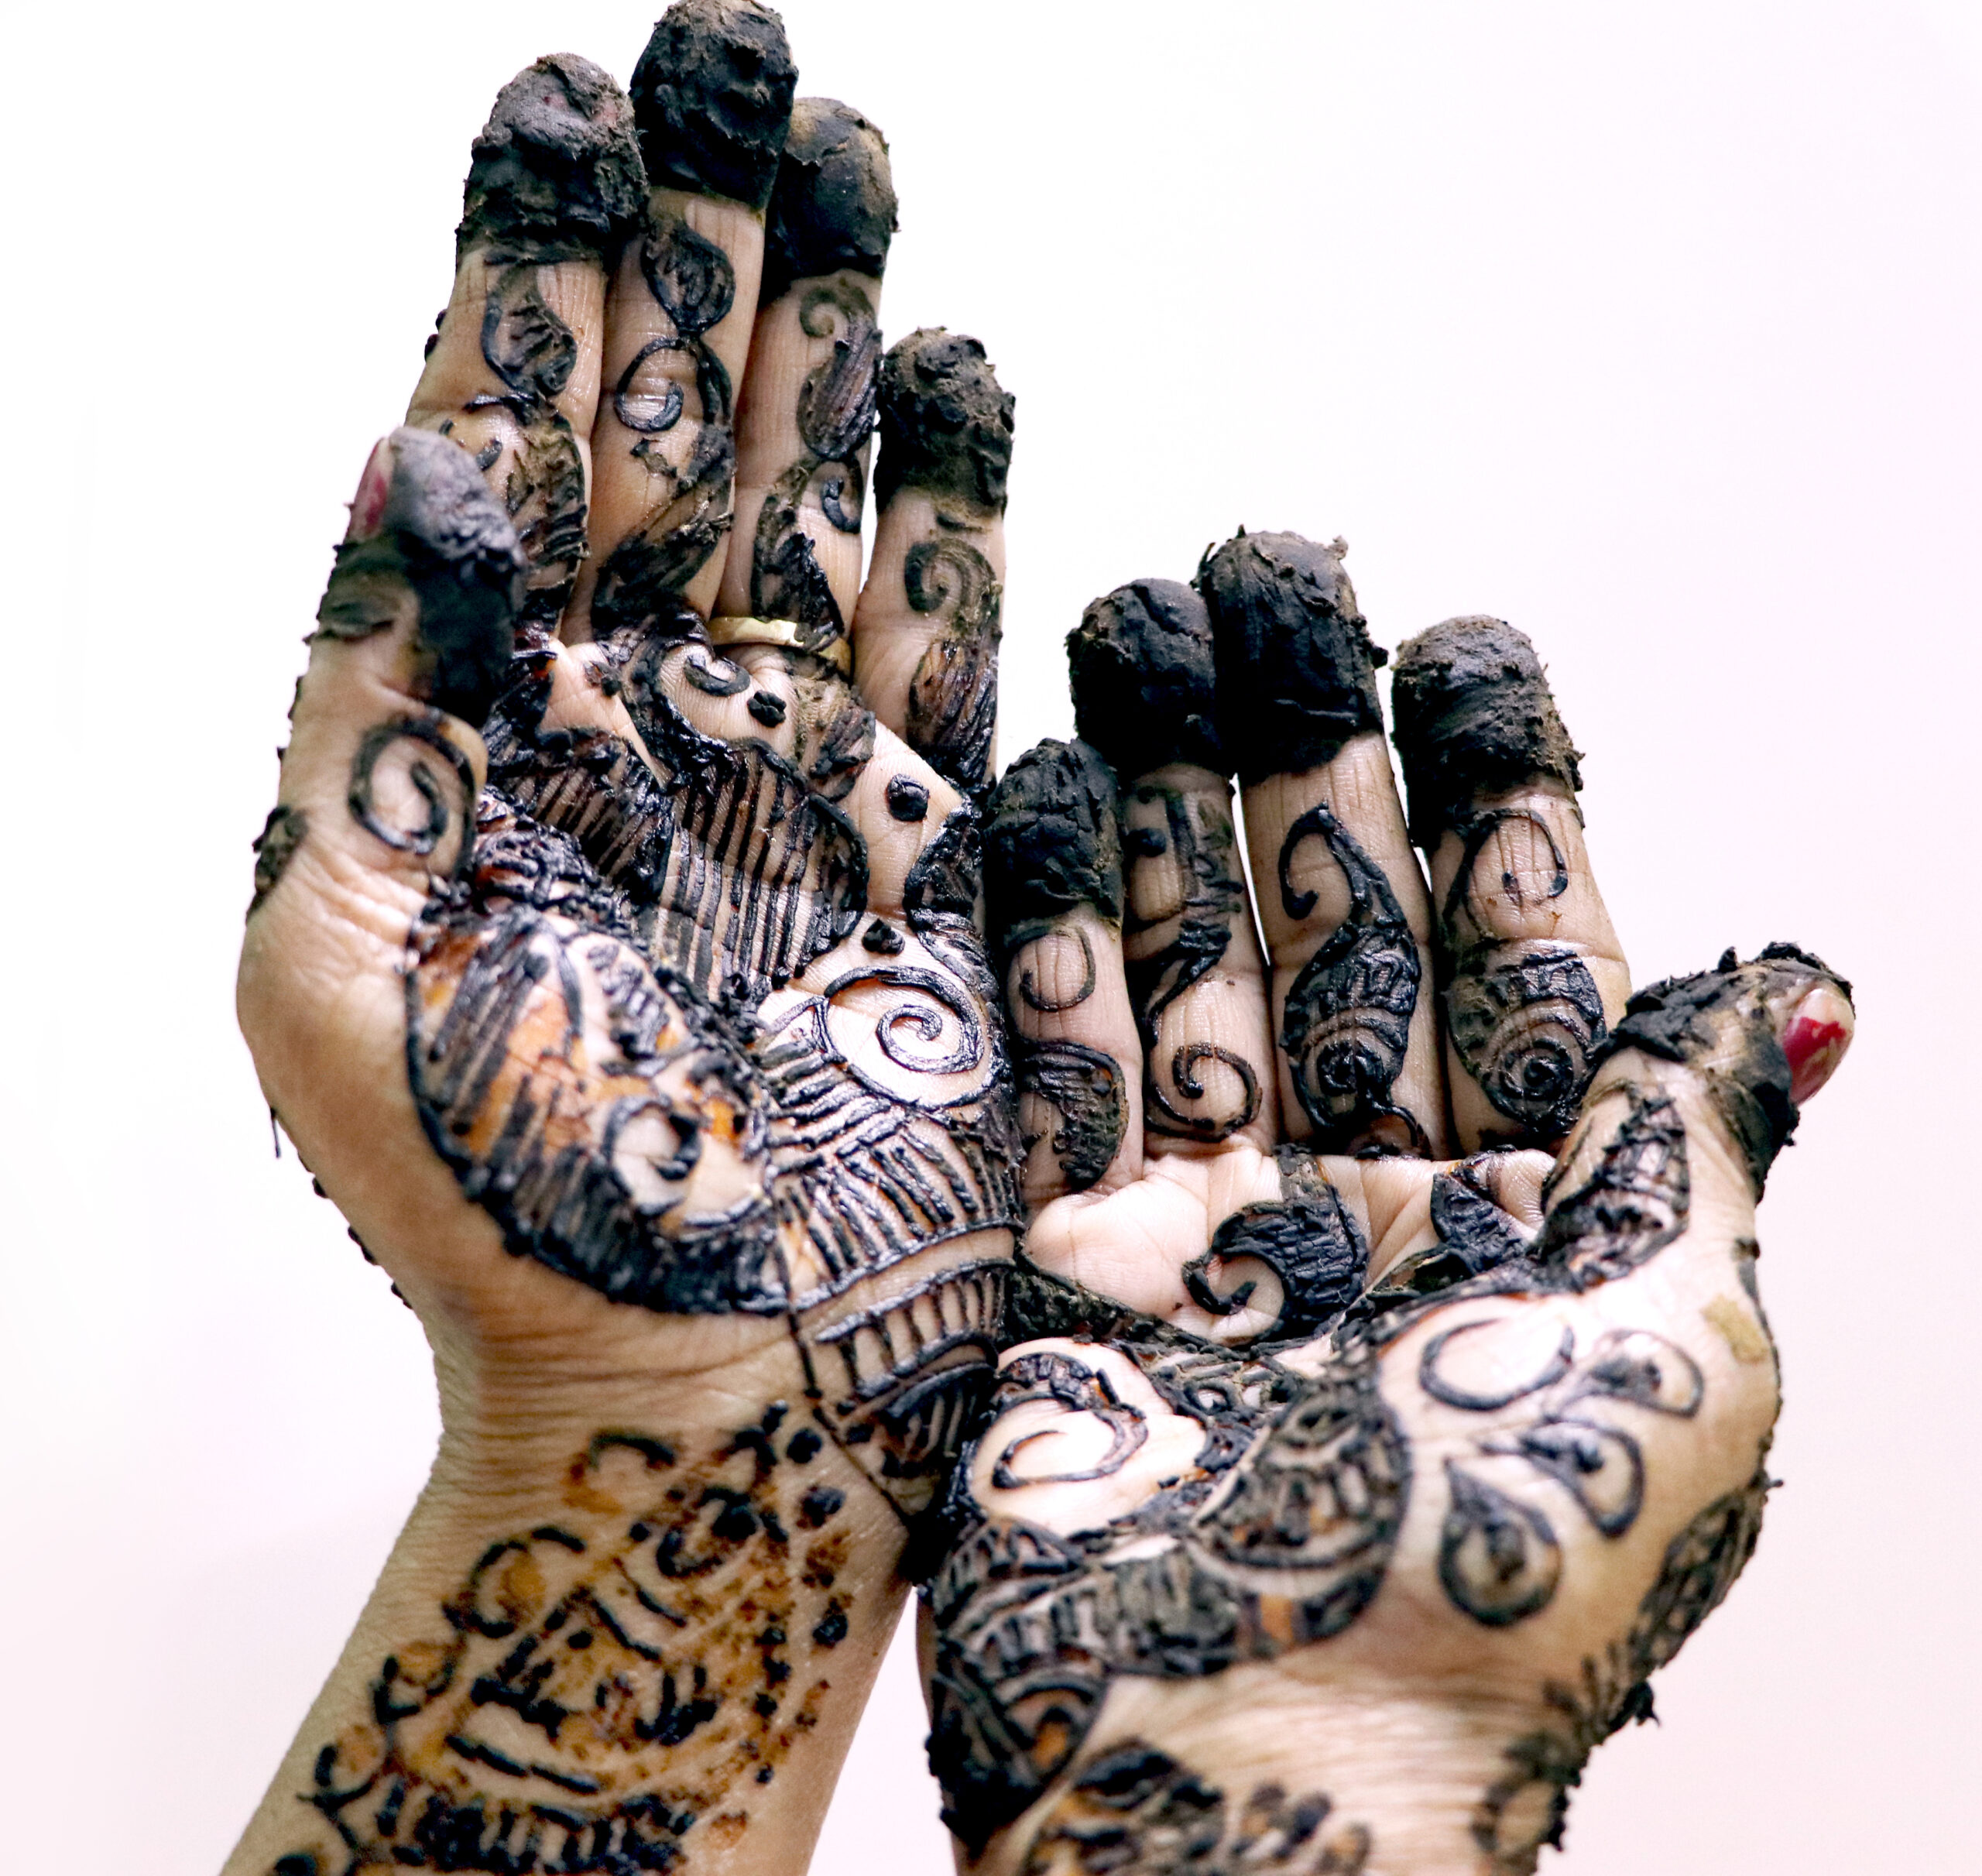 Popular Mehndi Designs for Hands or Hands painted with Mehandi Indian traditions